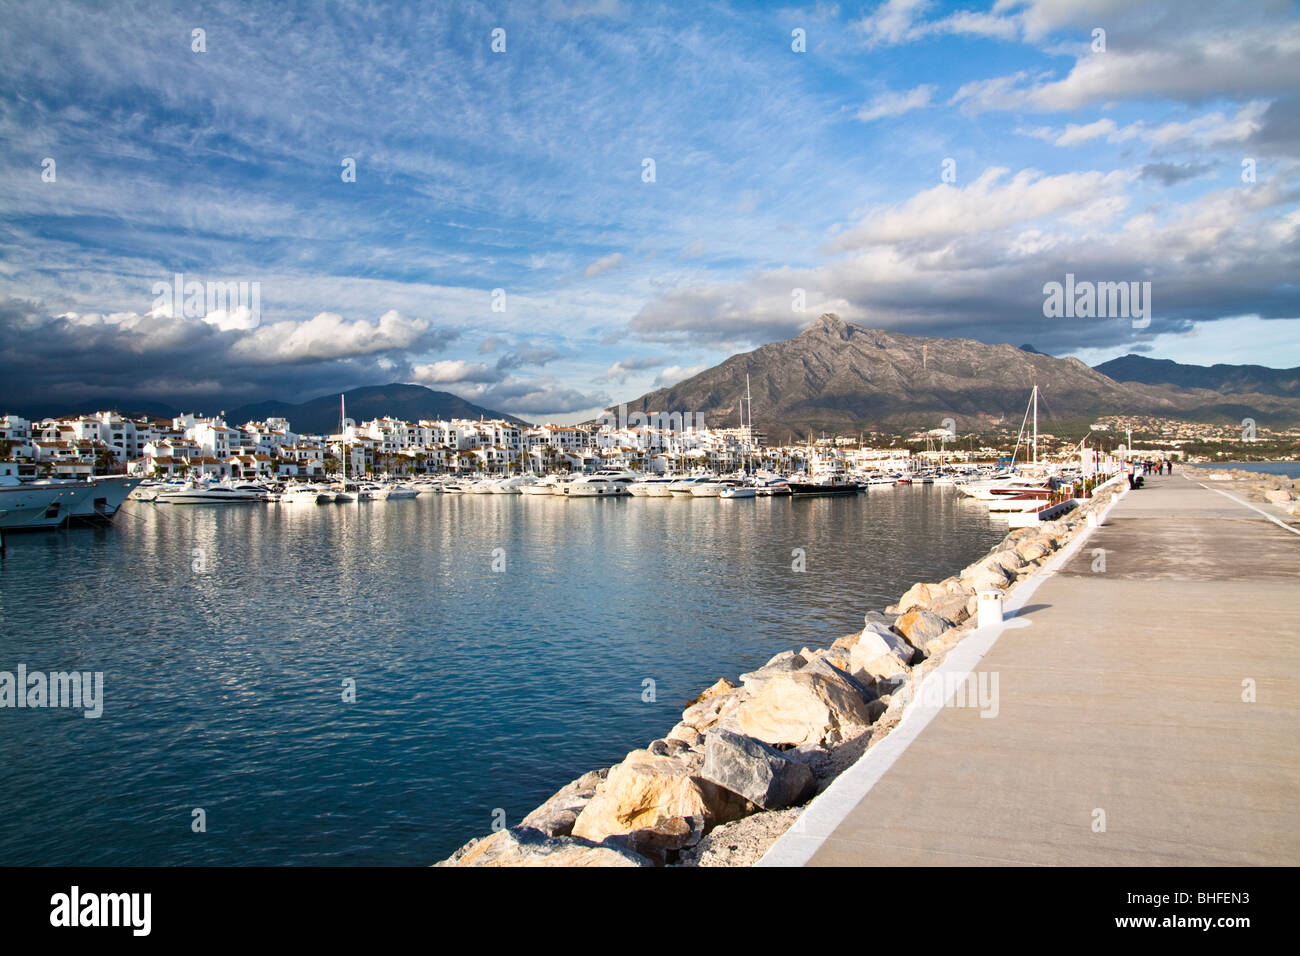 Luxury Yacht Harbour Puerto Banus, Marbella - Andalusia, Spagna Foto Stock